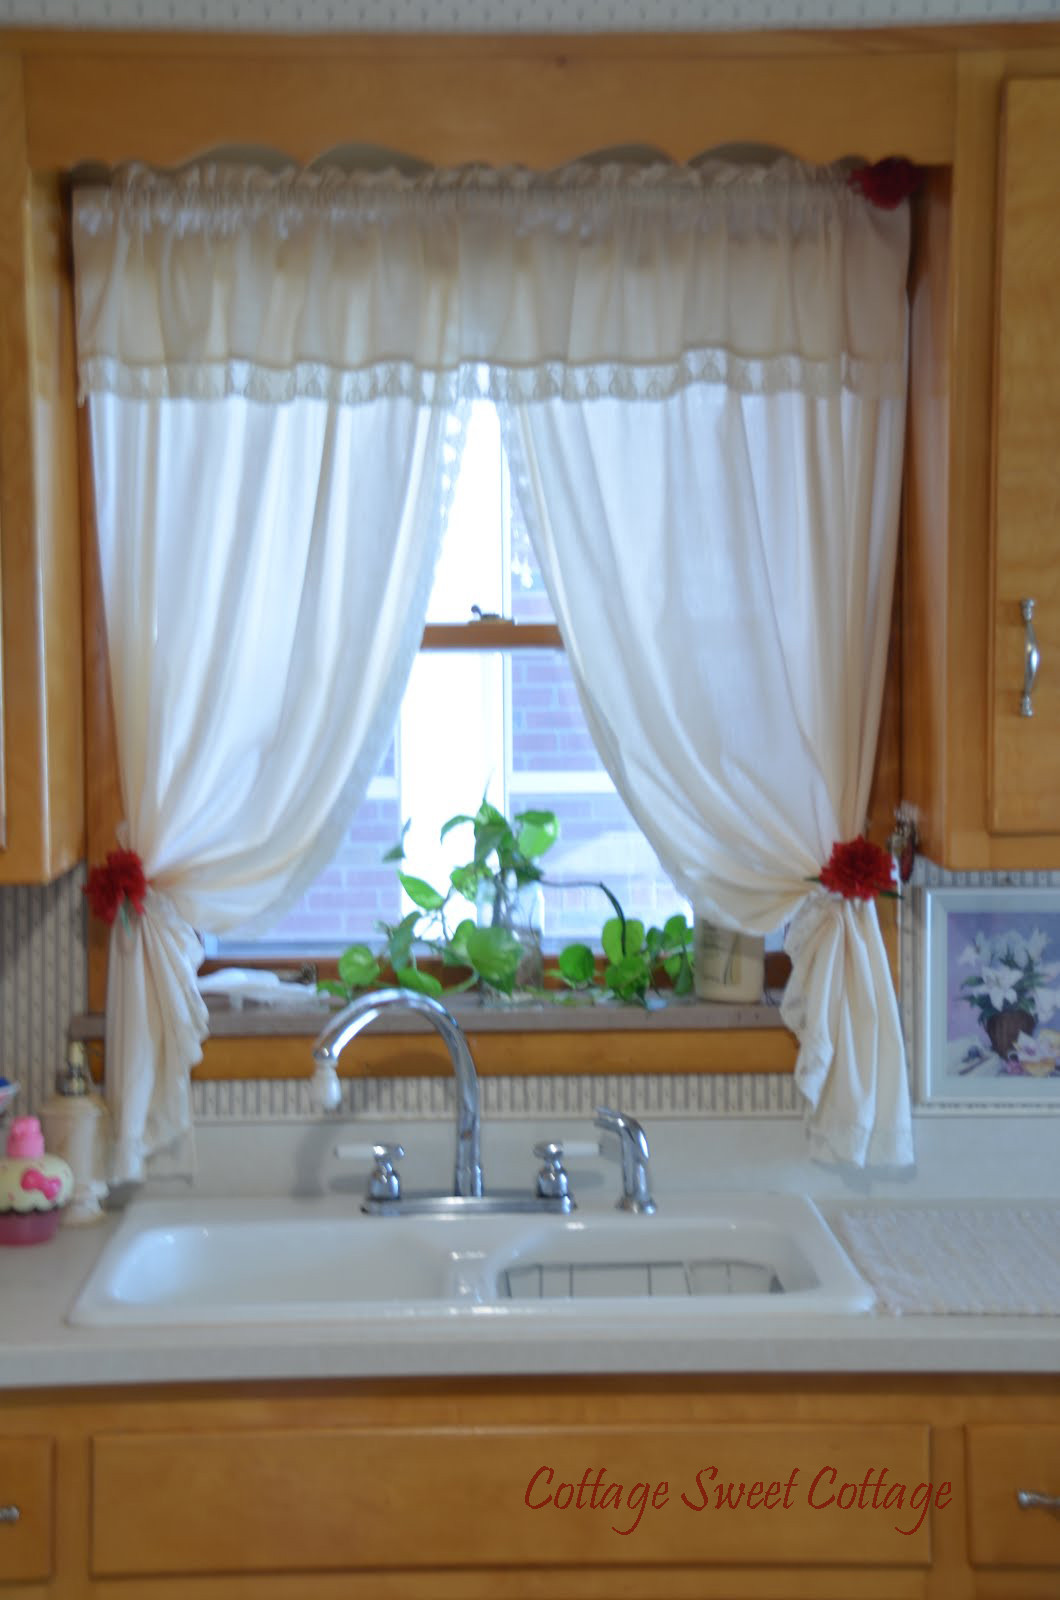 Cottage Kitchen Curtains
 Cottage Sweet Cottage Curtains for my SweetHeart Kitchen